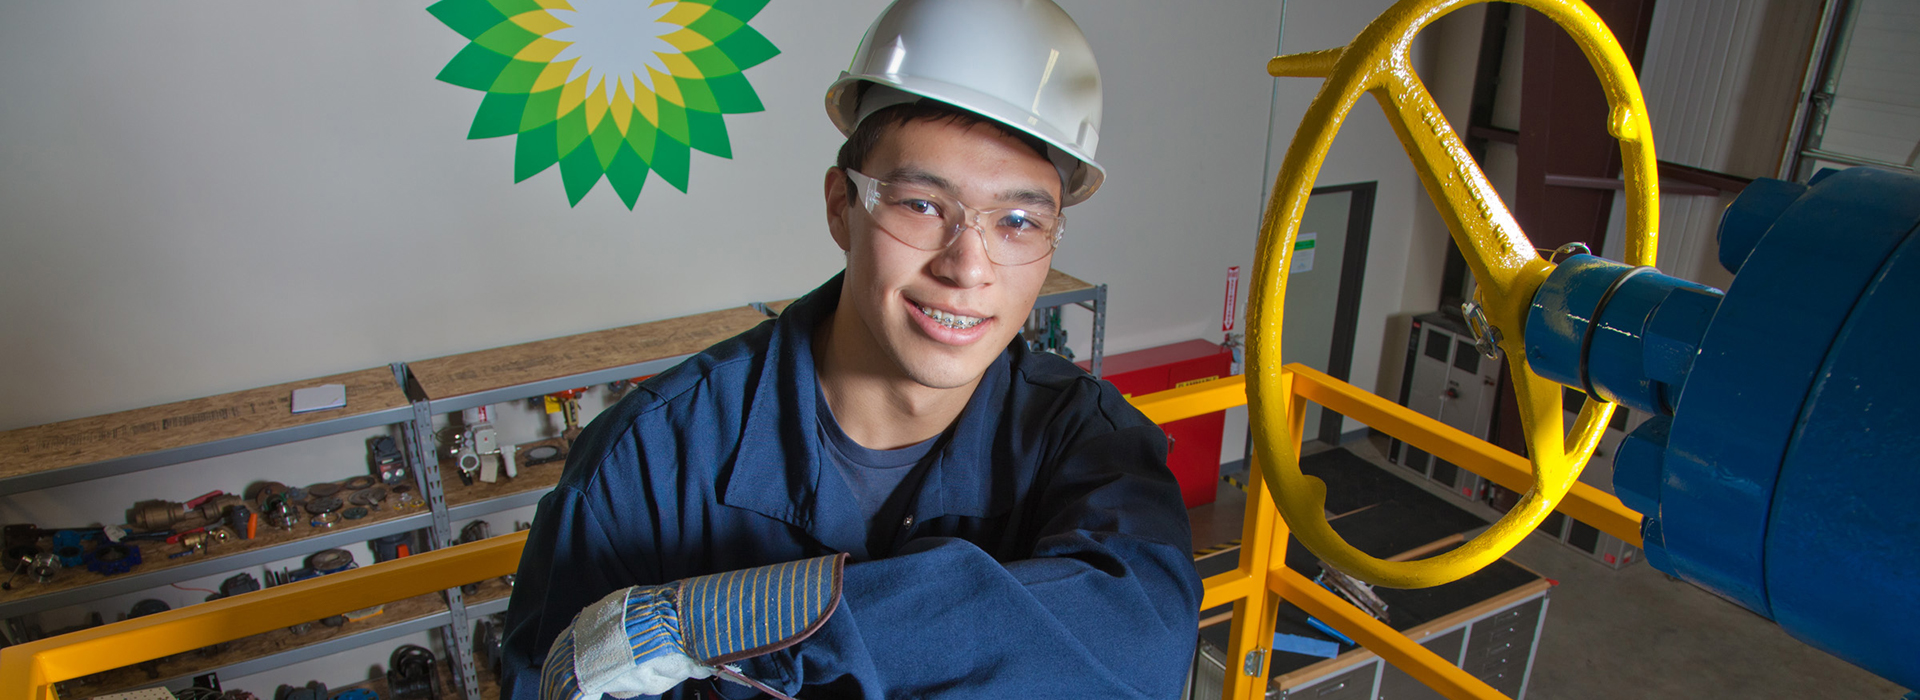 Petroleum Engineering and Process Technology major, Stefan Weingarth, opens a valve on the oil field well head at CTC&#39;s process technology facility on Van Horn Road. The working well head was part of a donation worth almost $4 million made by BP. Credit: UAF Photo by Todd Paris